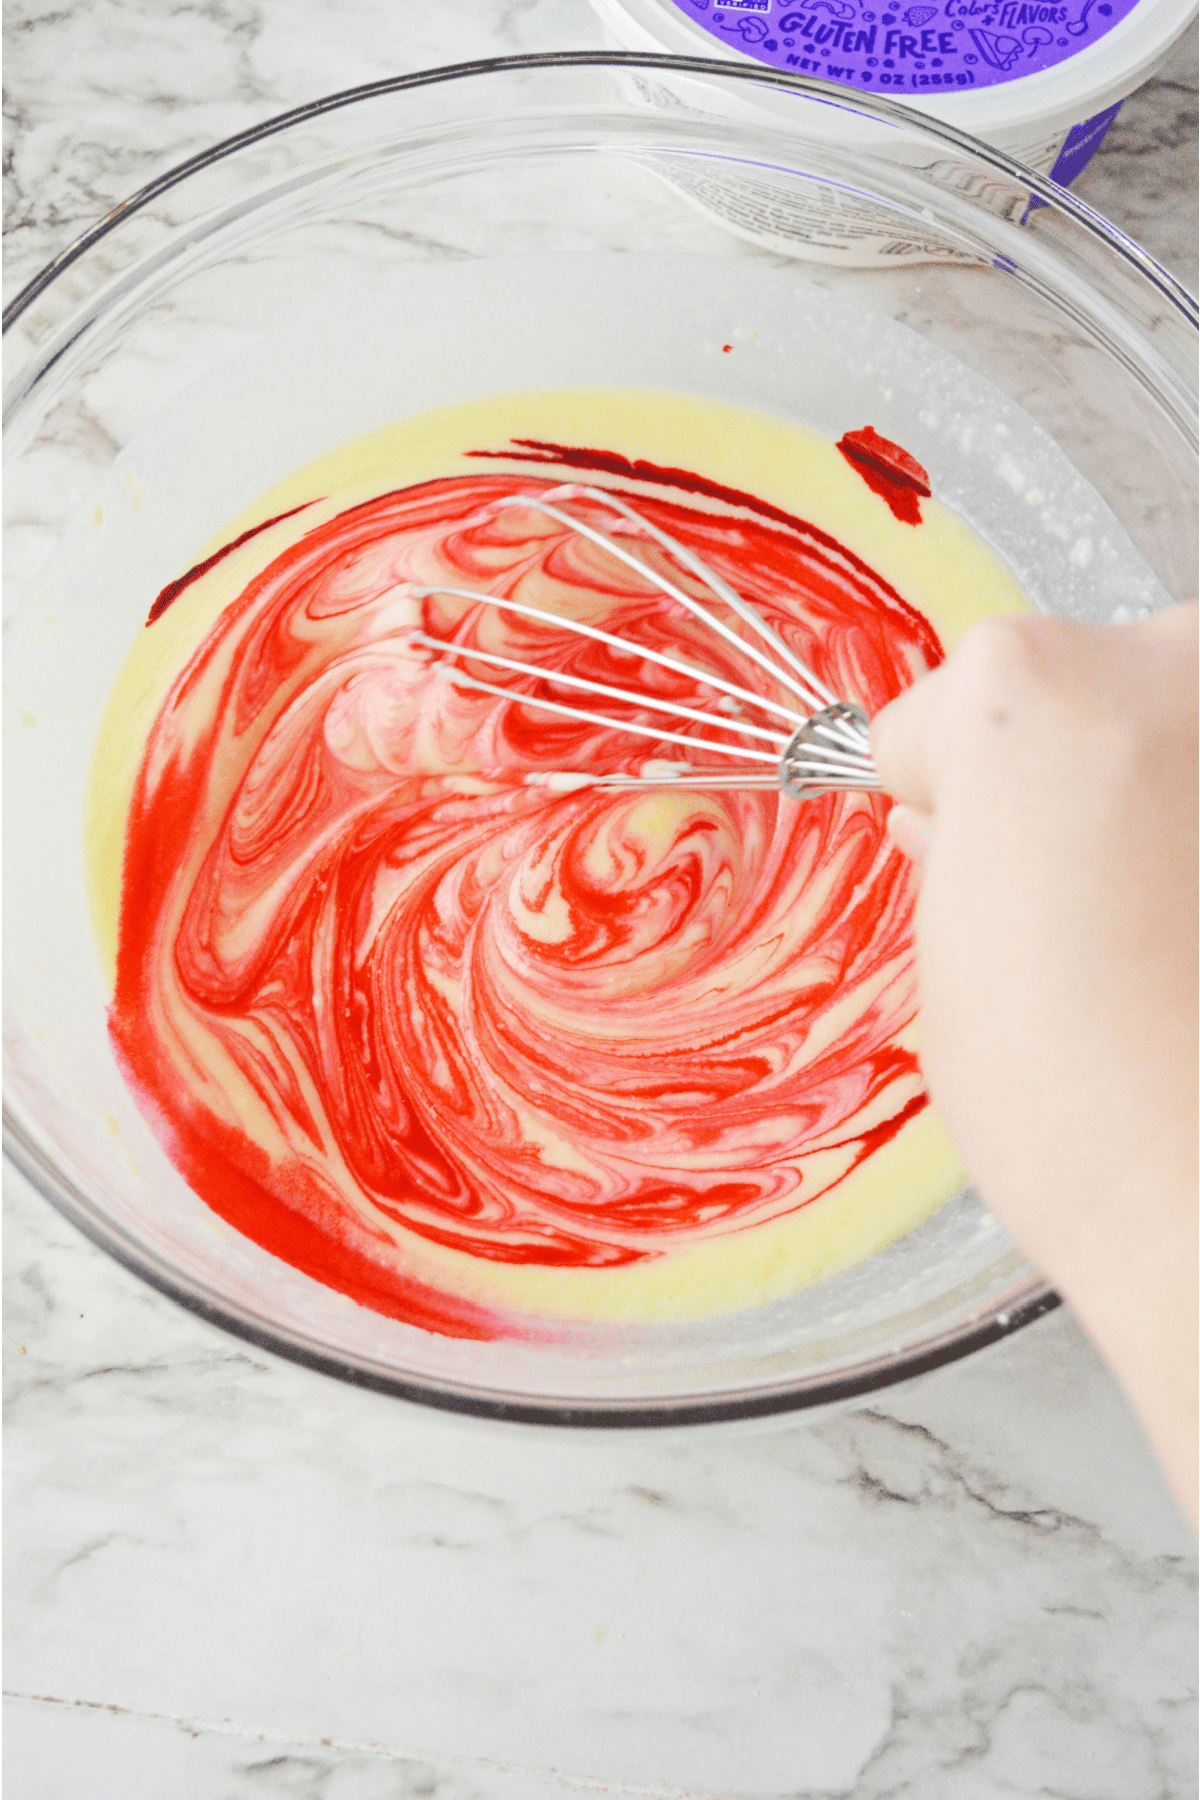 Red food coloring being mixed into pudding